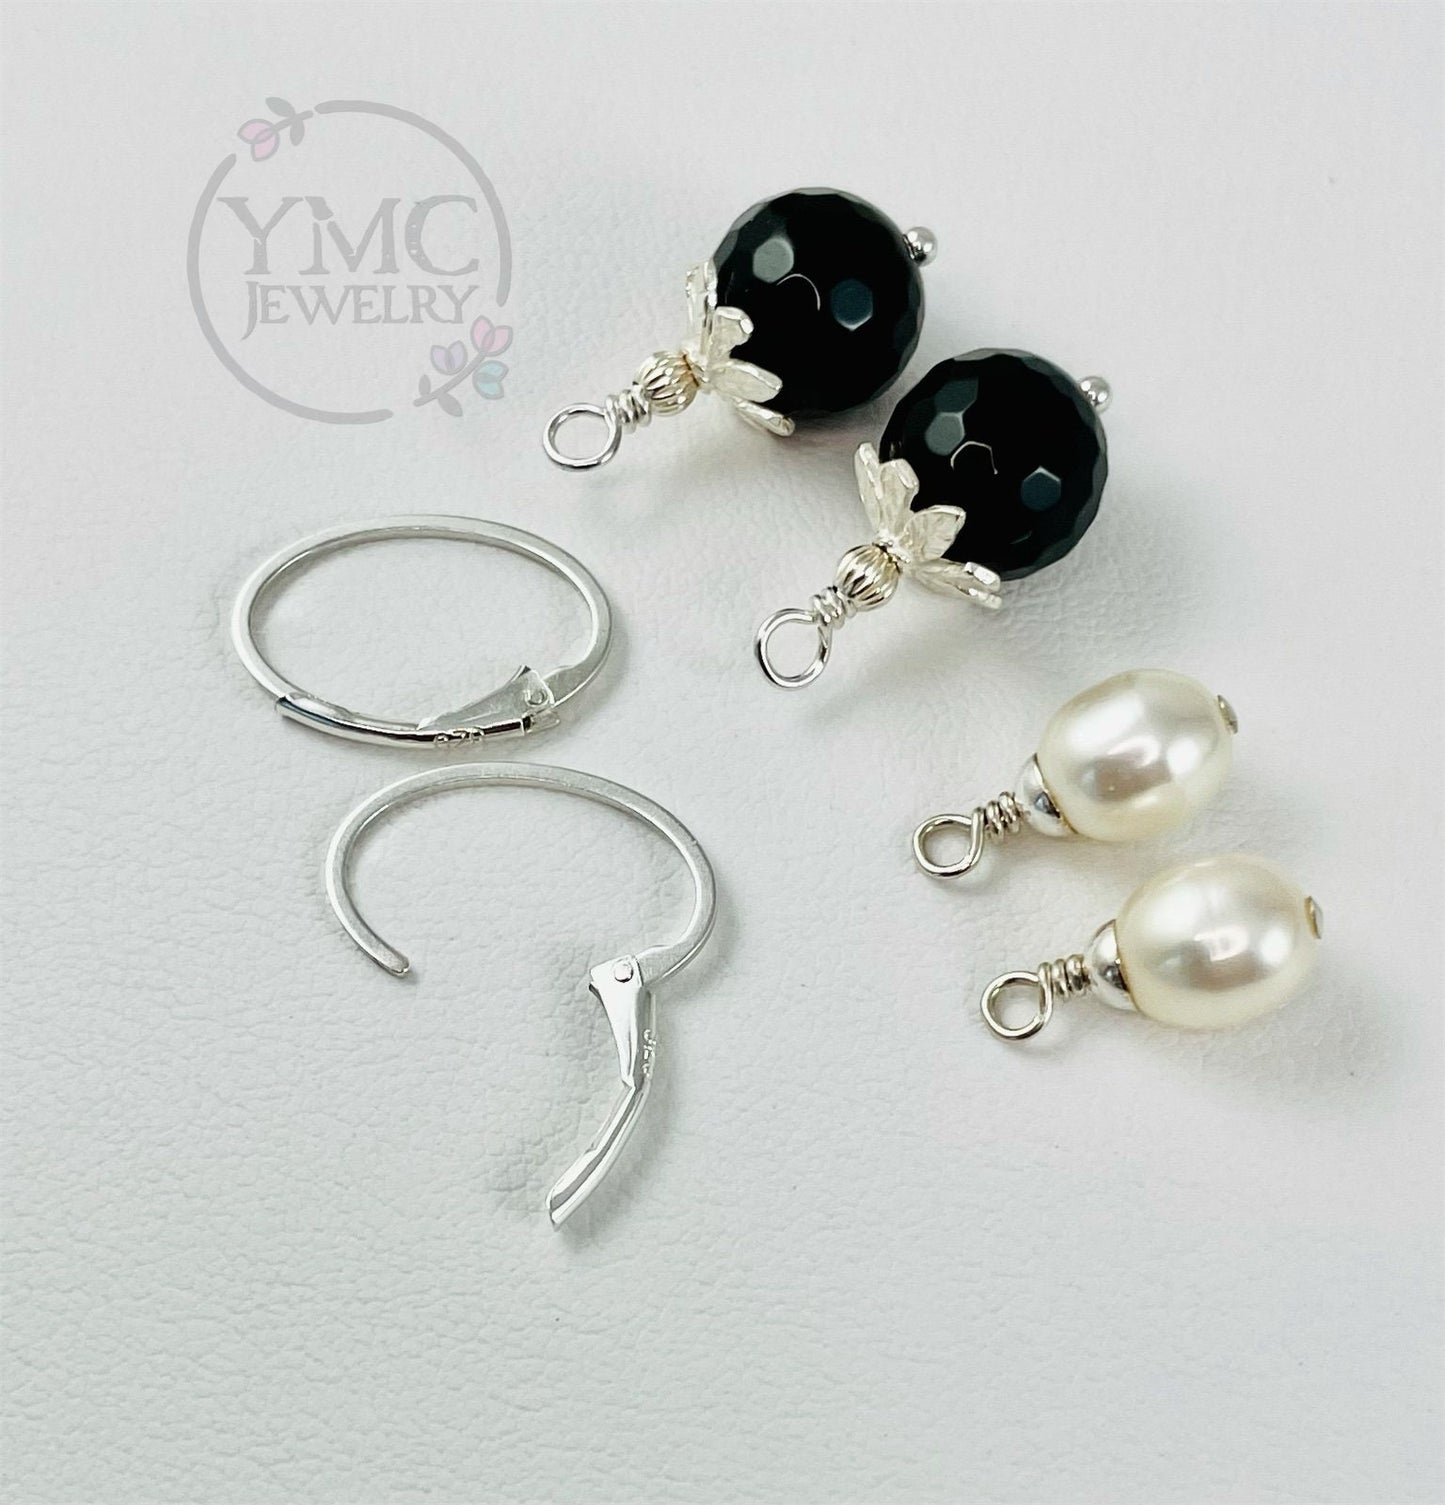 Interchangeable Silver Leverback Earrings-2 Pairs,Lever back Black Onyx and Pearls Earrings,Interchangeable Charms,Interchangeable Earrings